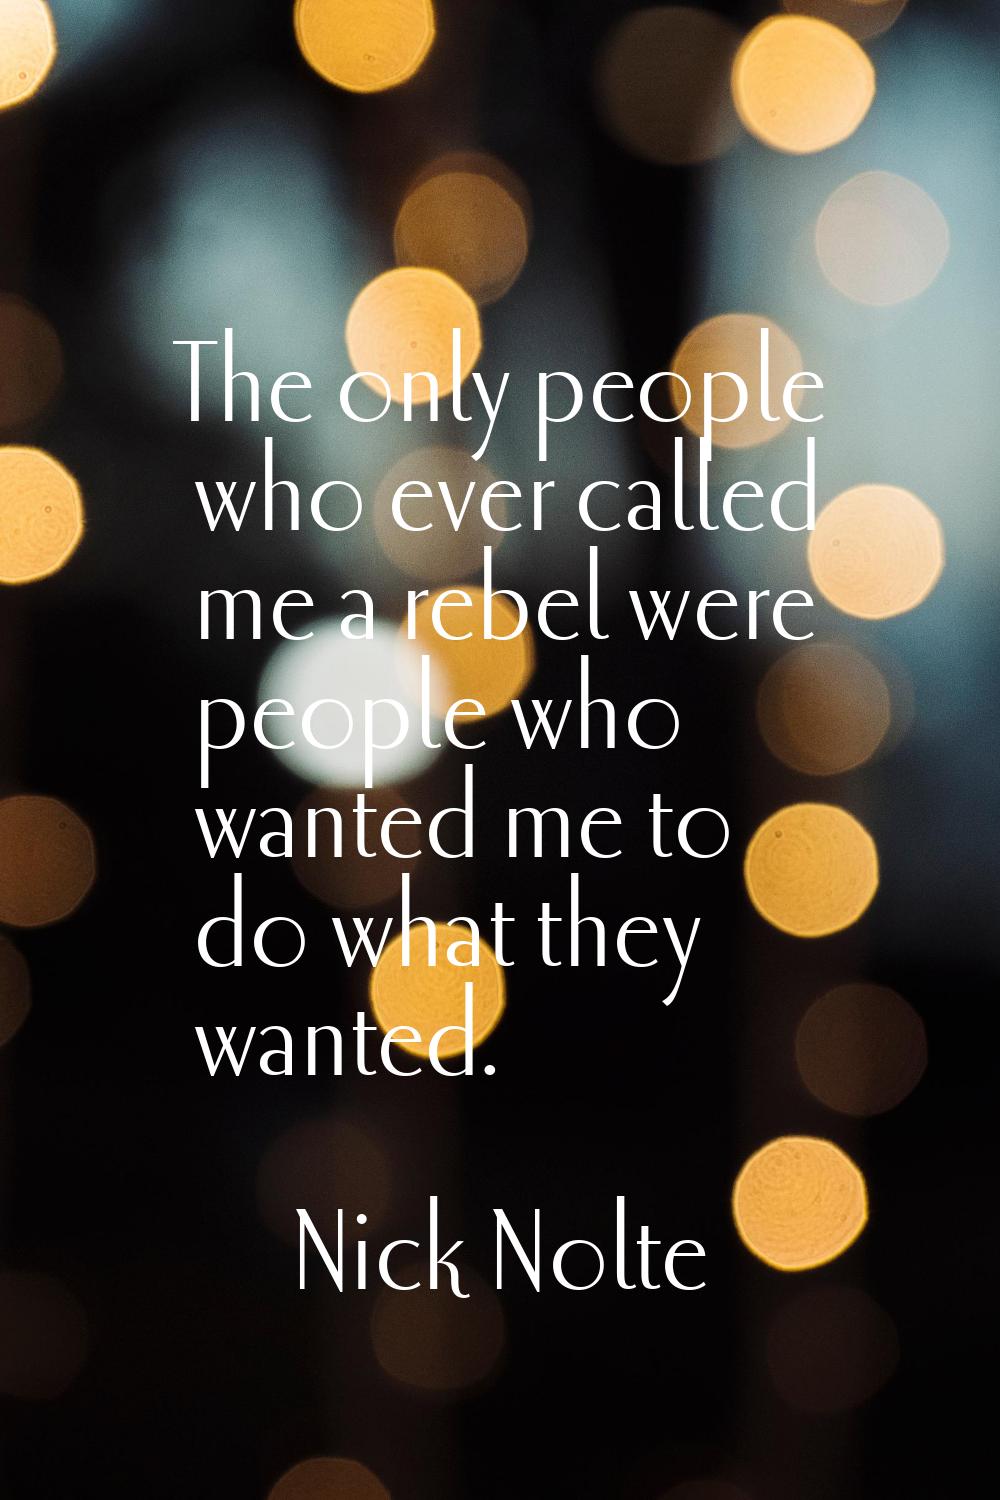 The only people who ever called me a rebel were people who wanted me to do what they wanted.